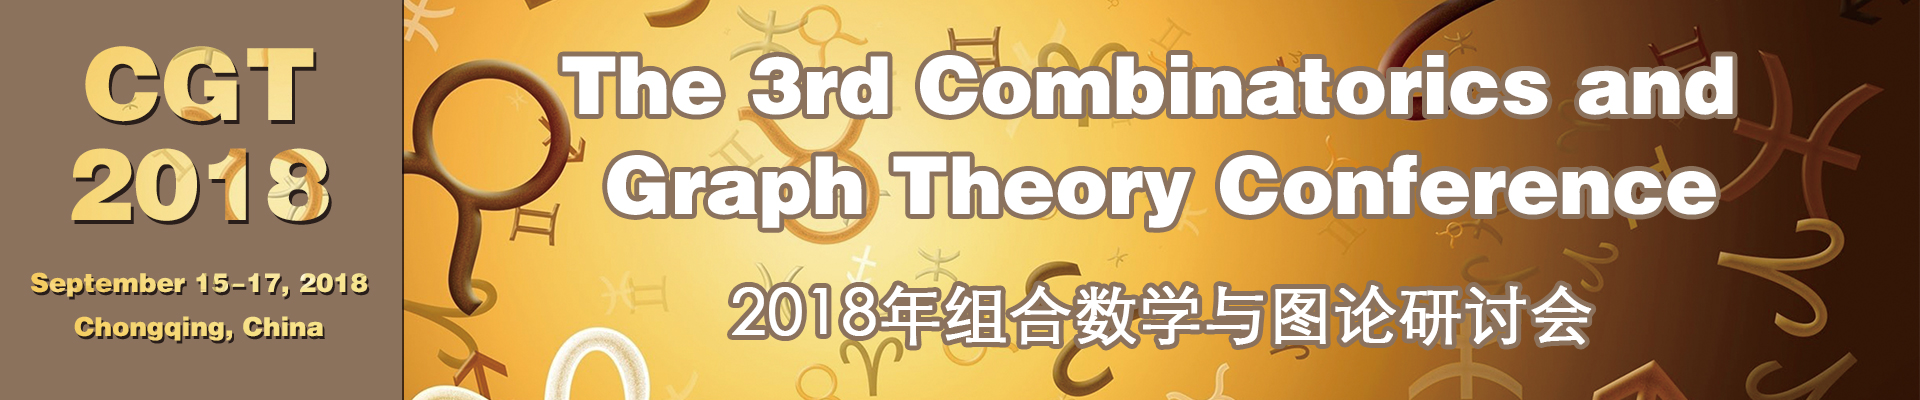 3rd Combinatorics and Graph Theory Conference